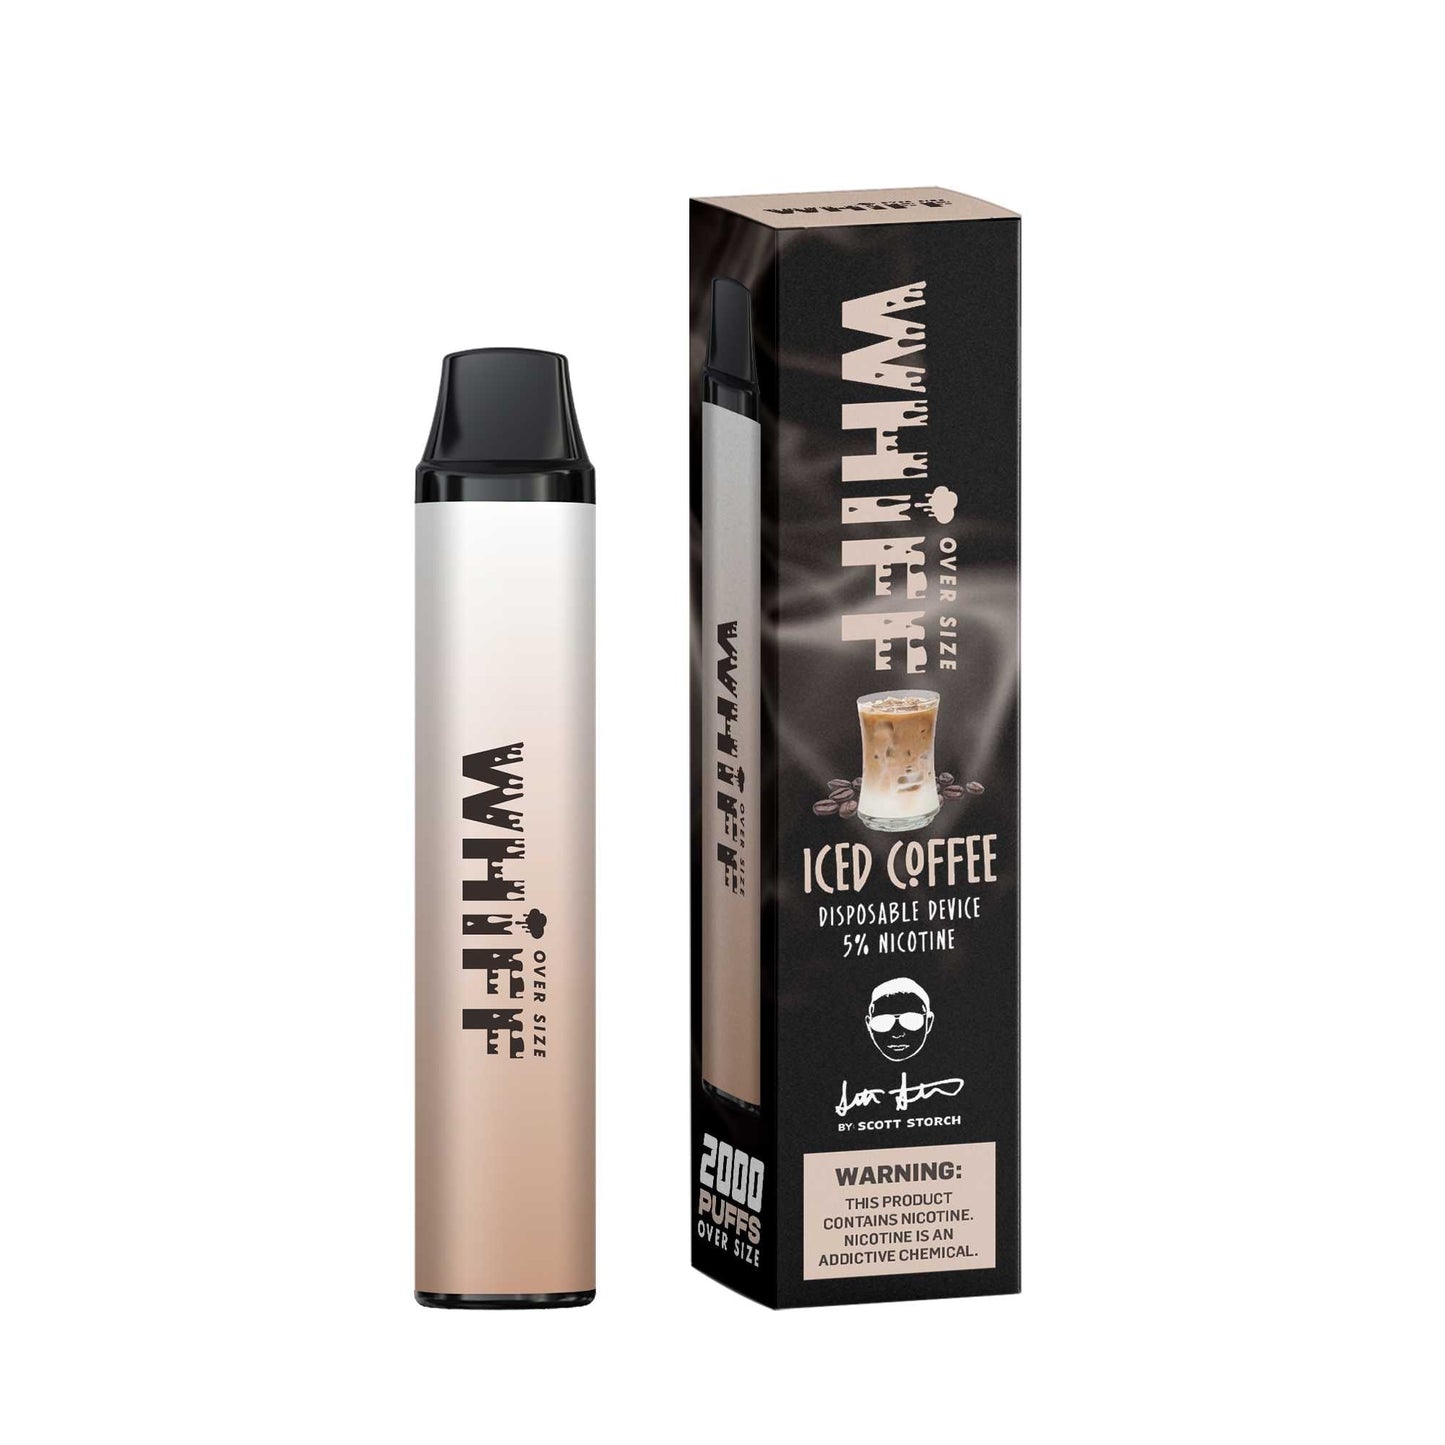 Whiff OversizeIced coffee Flavor - Disposable Vape